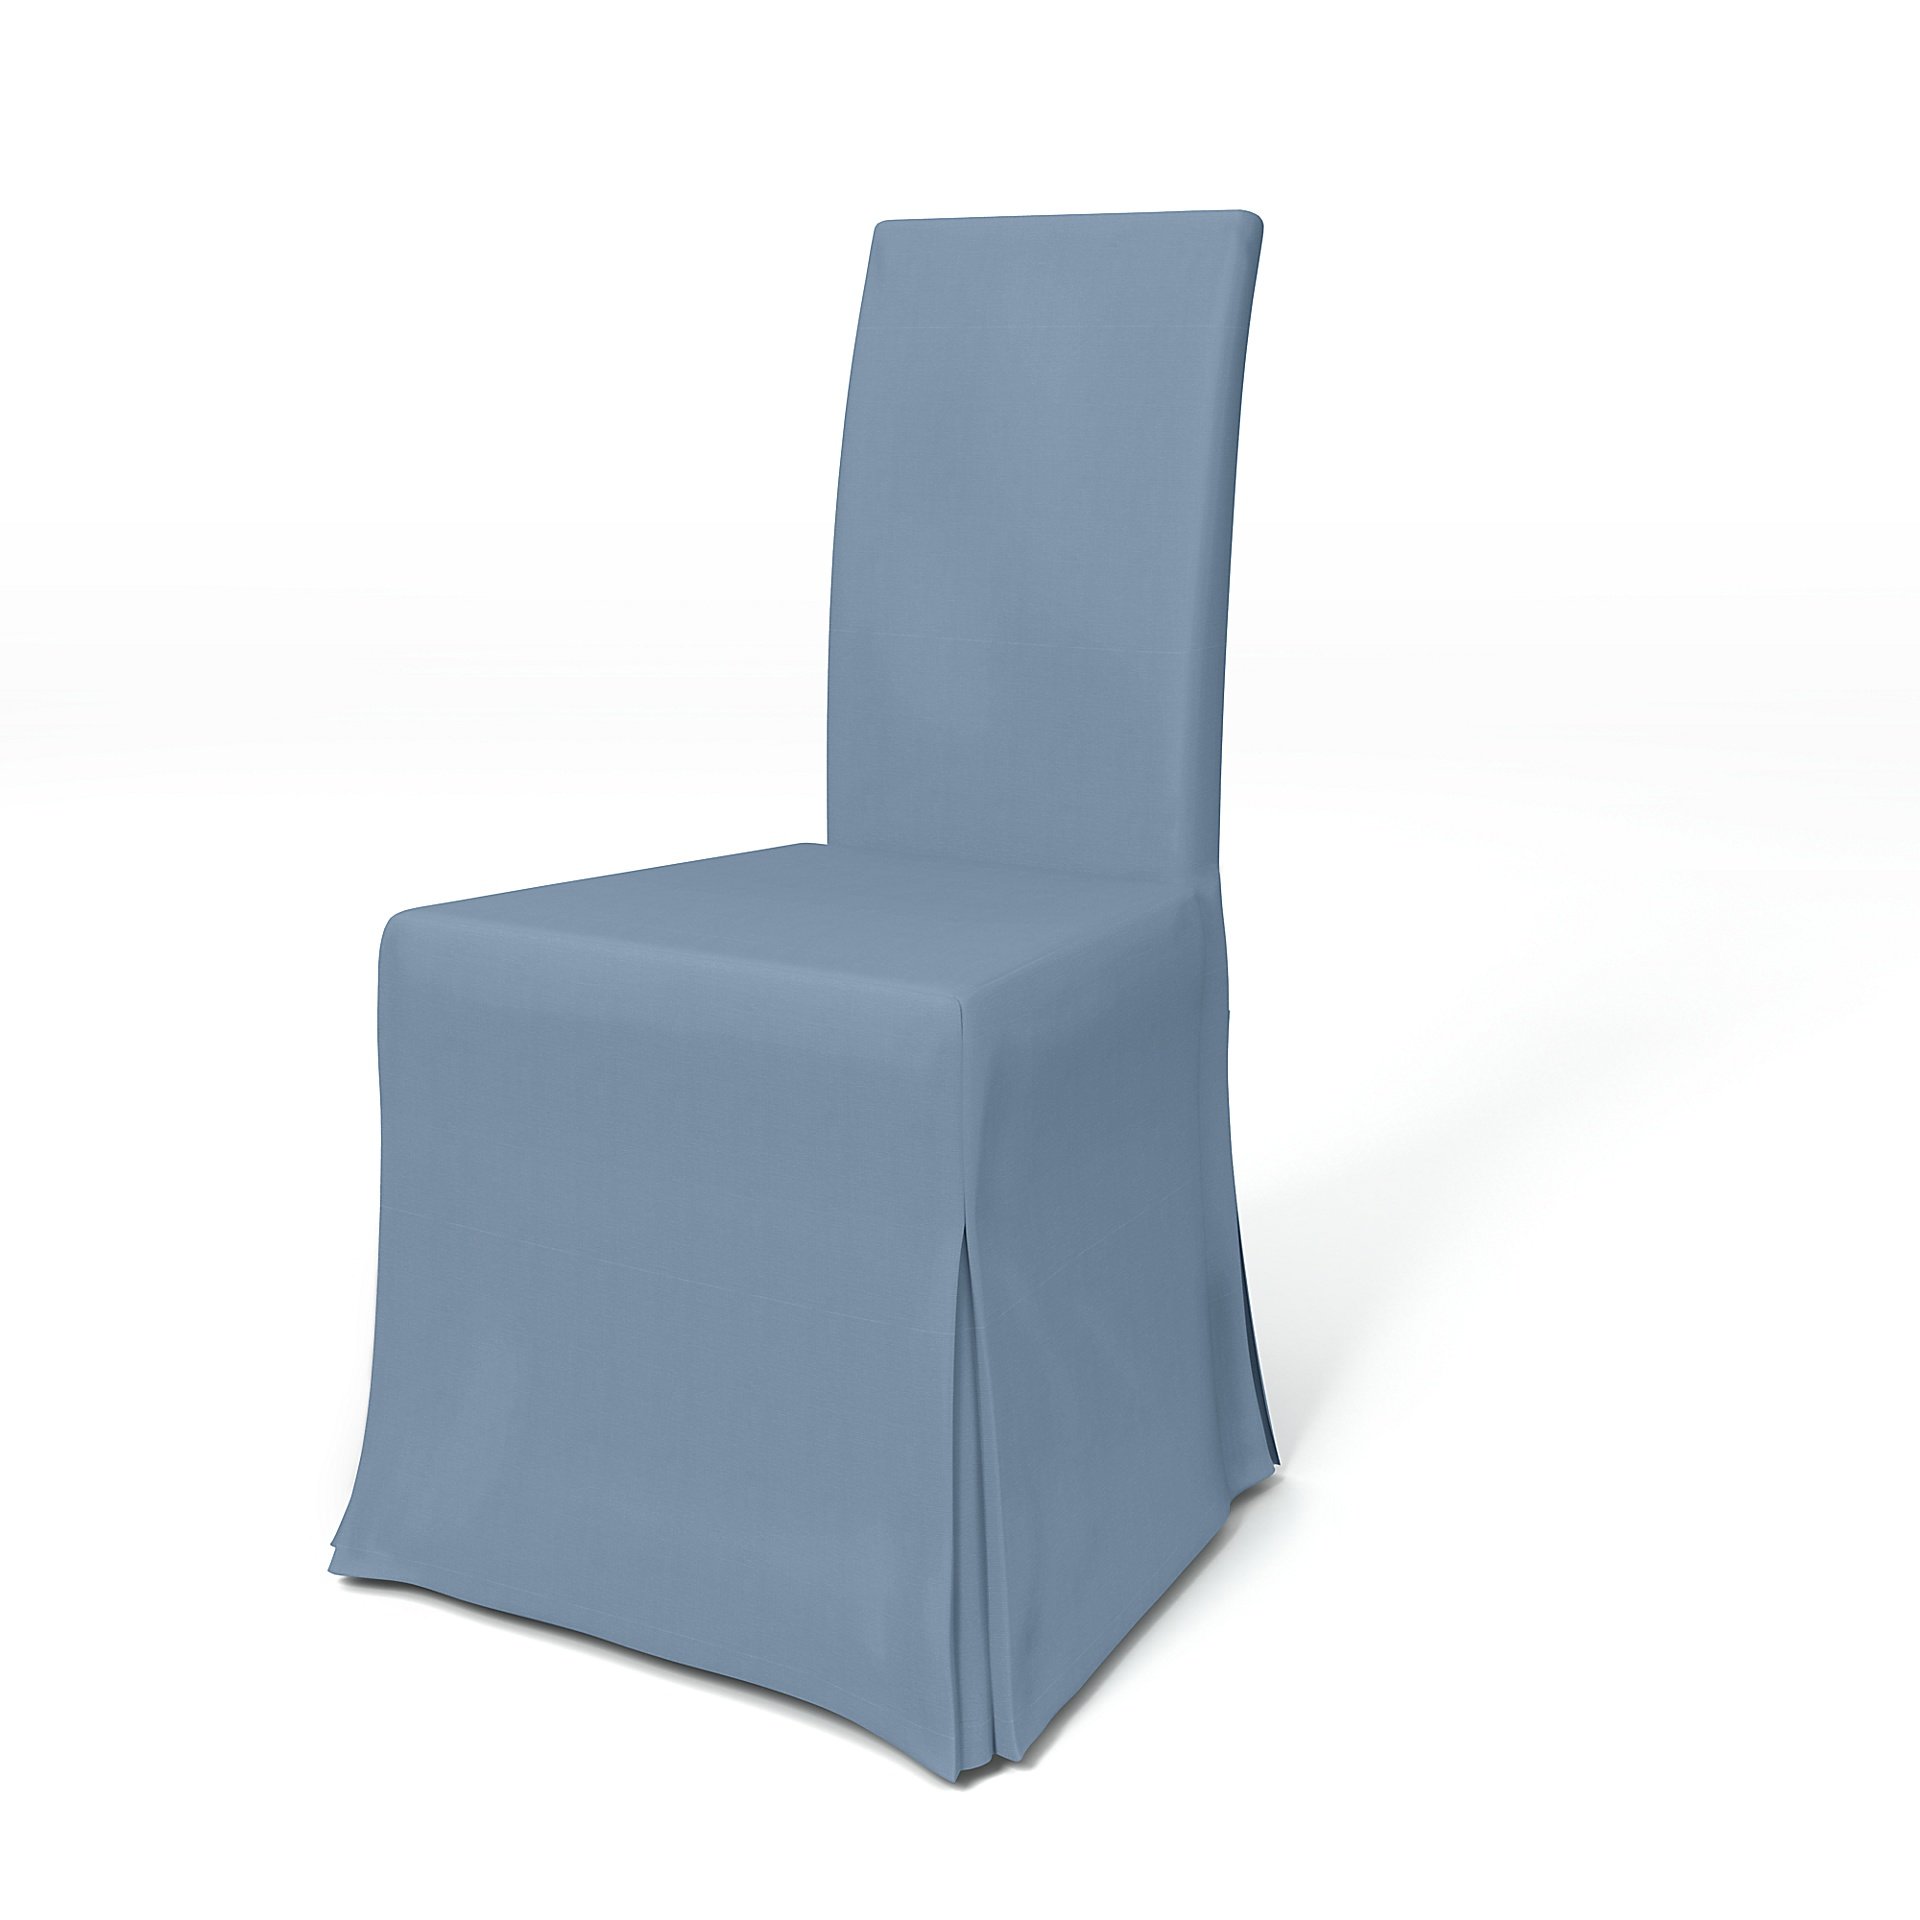 IKEA - Harry Dining Chair Cover, Dusty Blue, Cotton - Bemz